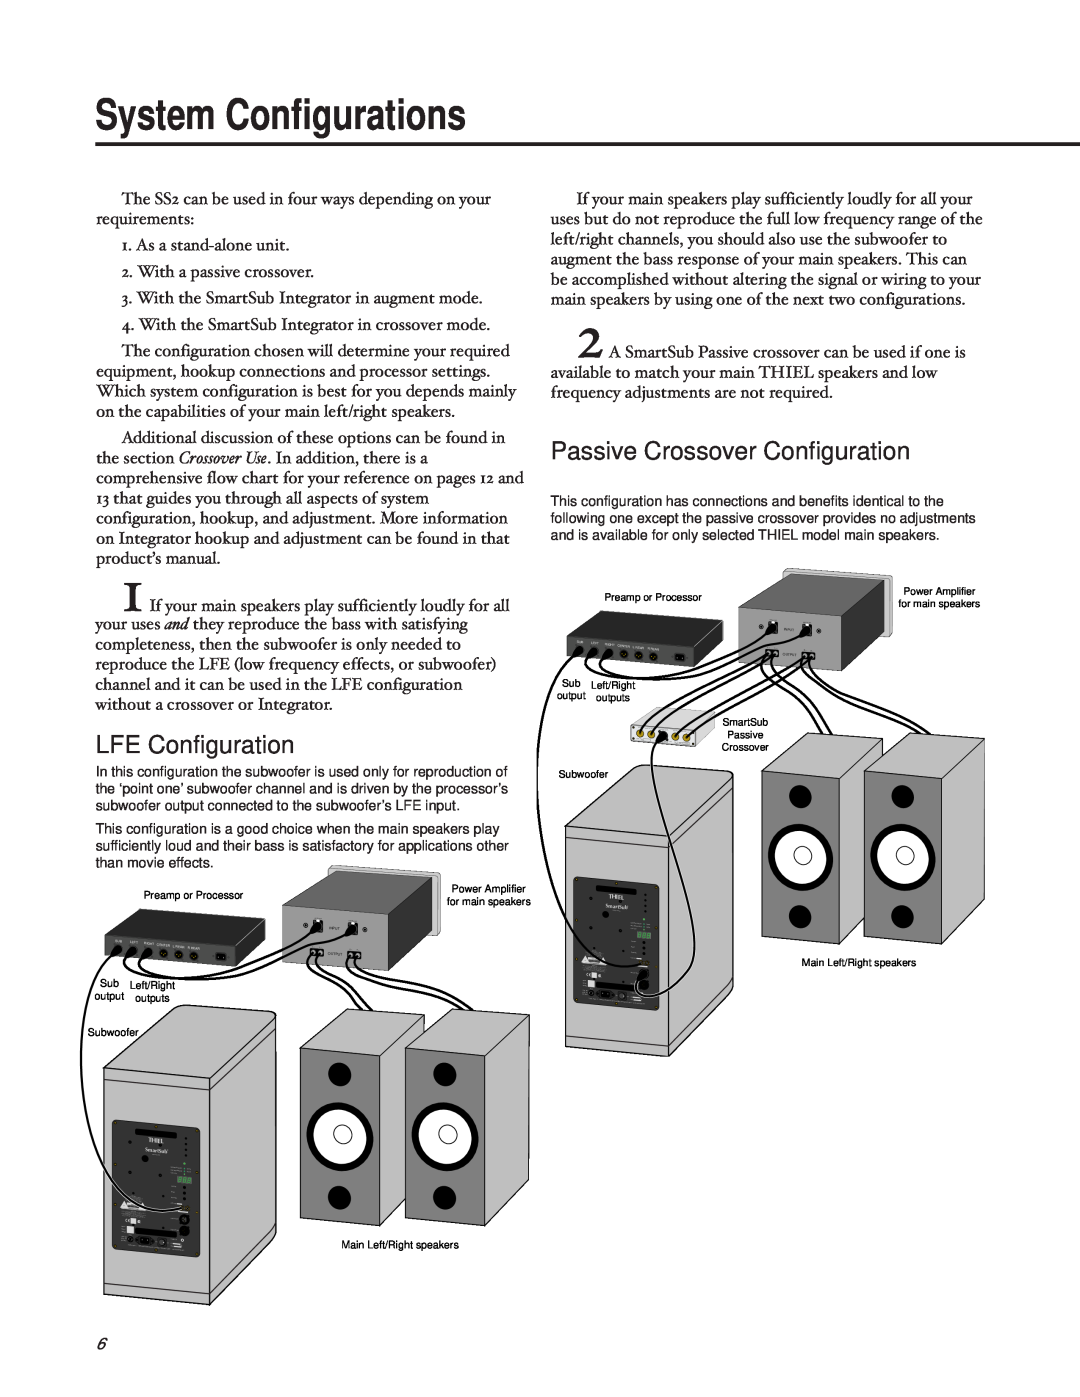 Thiel Audio Products SS2 manual System Configurations, Passive Crossover Configuration, LFE Configuration 